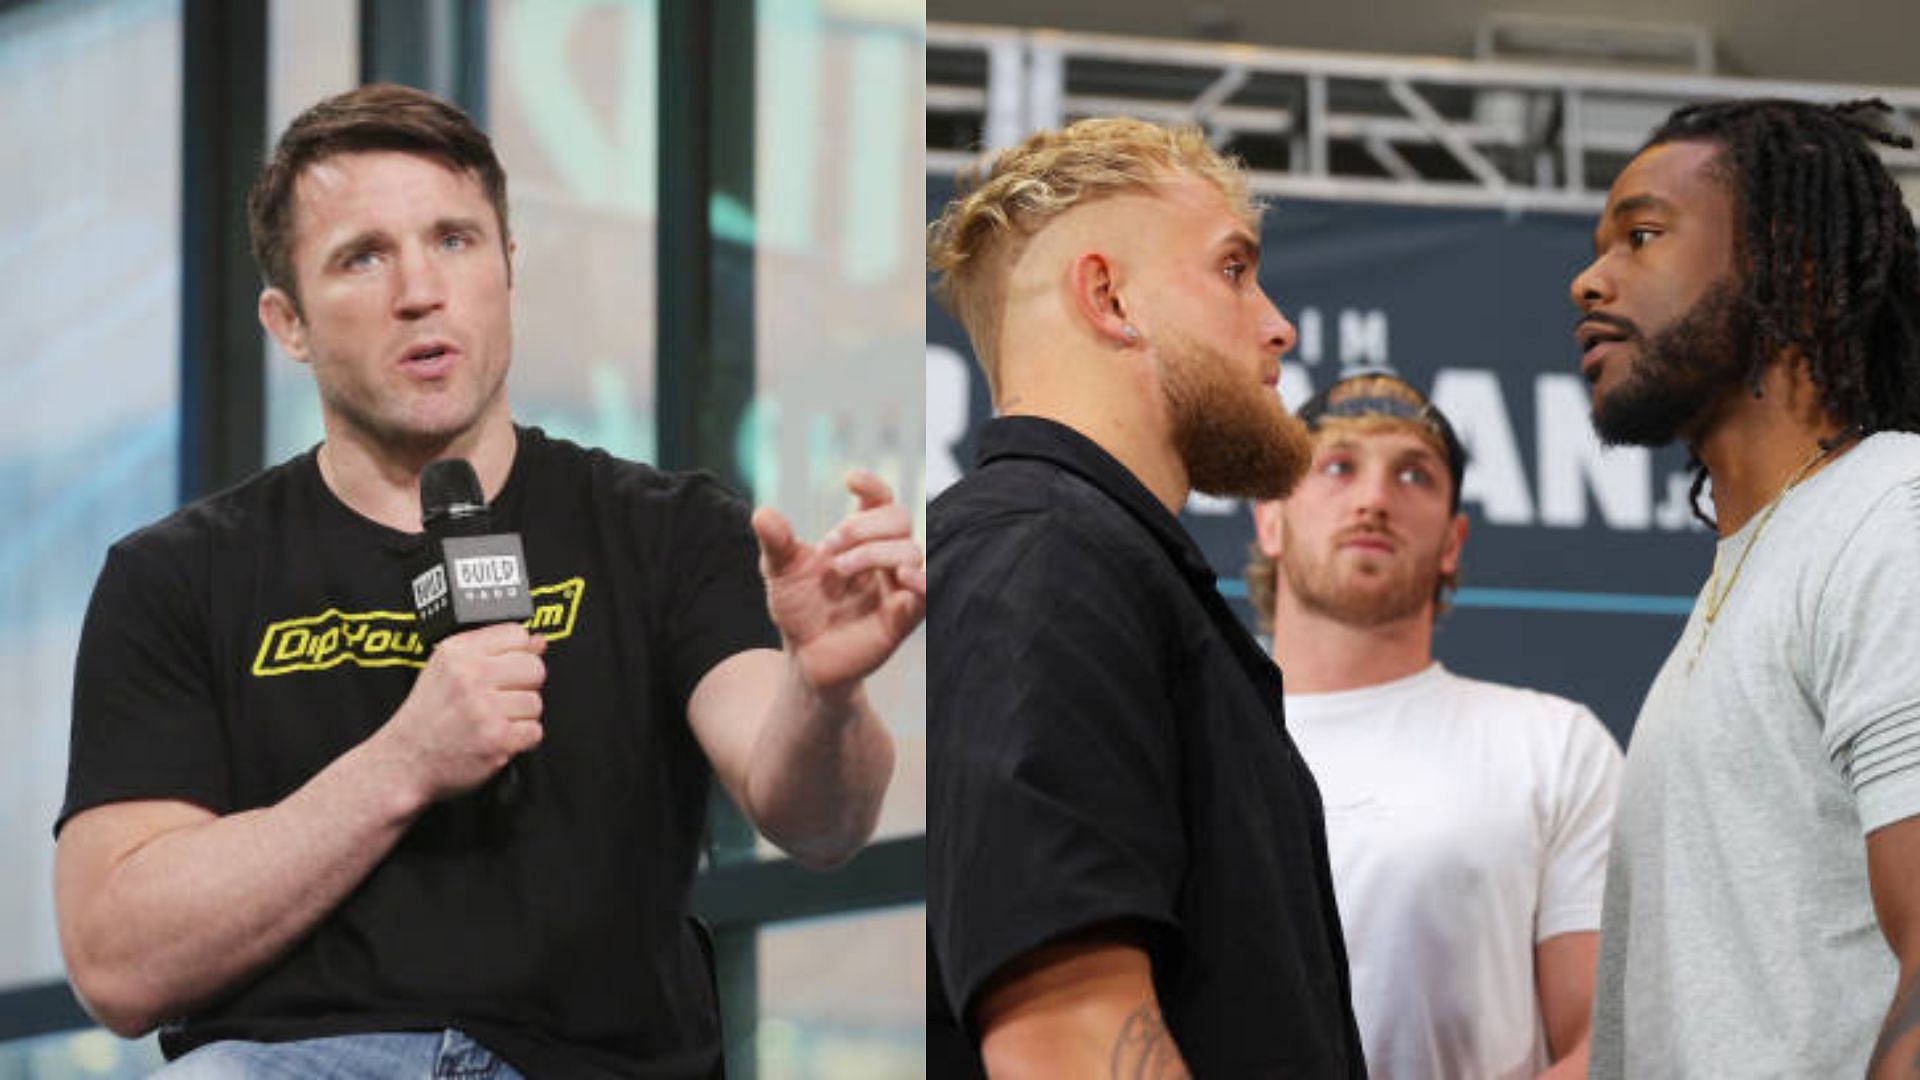 Chael Sonnen (left) claims Jake Paul (right) always wants to be the bigger guy